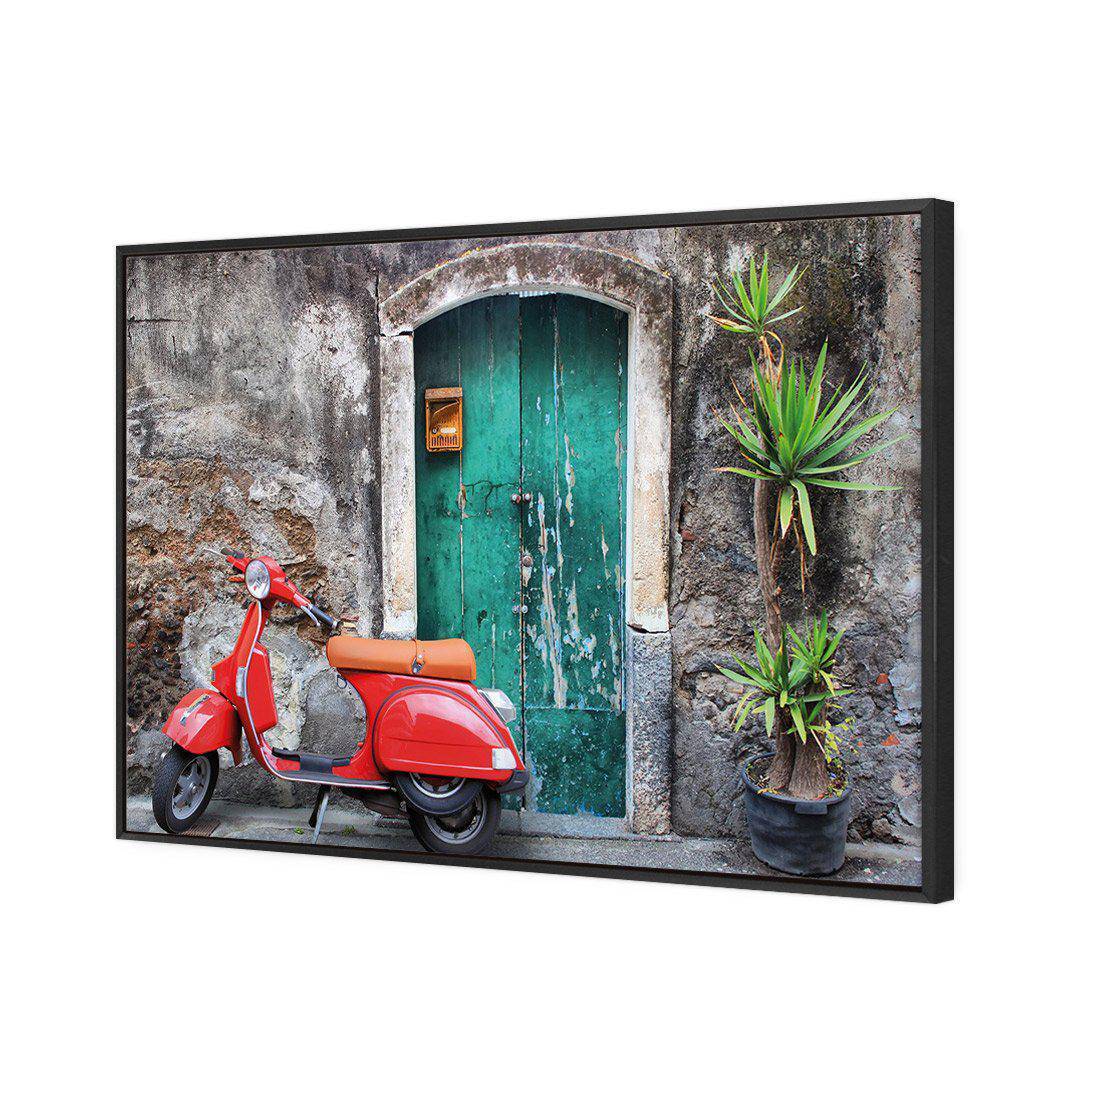 Vintage Door And Scooter Canvas Art-Canvas-Wall Art Designs-45x30cm-Canvas - Black Frame-Wall Art Designs